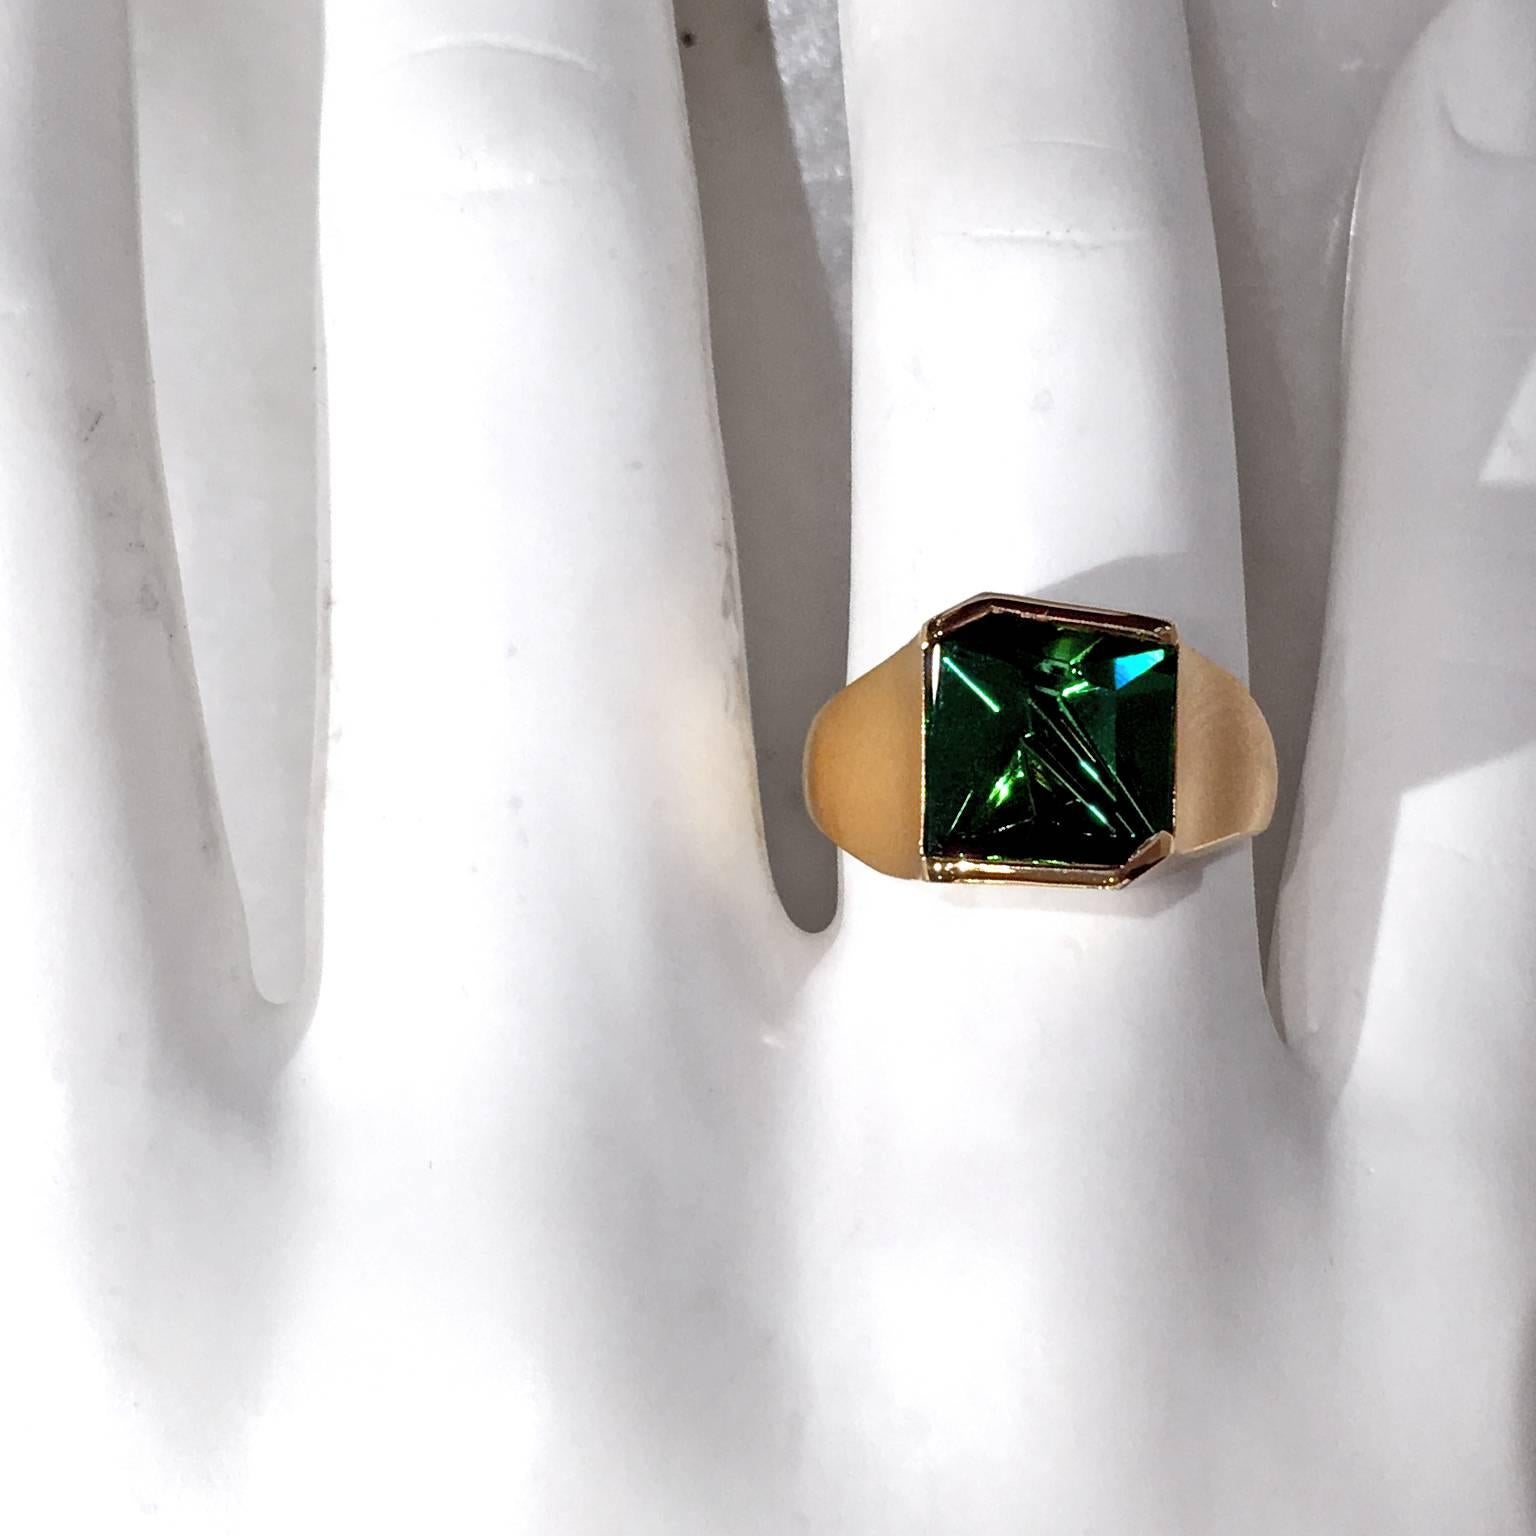 One-of-a-Kind Ring handcrafted in matte-finished 18k yellow gold with a spectacular 3.53 carat abstract-cut green tourmaline bezel-set with two polished 18k yellow gold bars. Size 7.5 (can be sized).